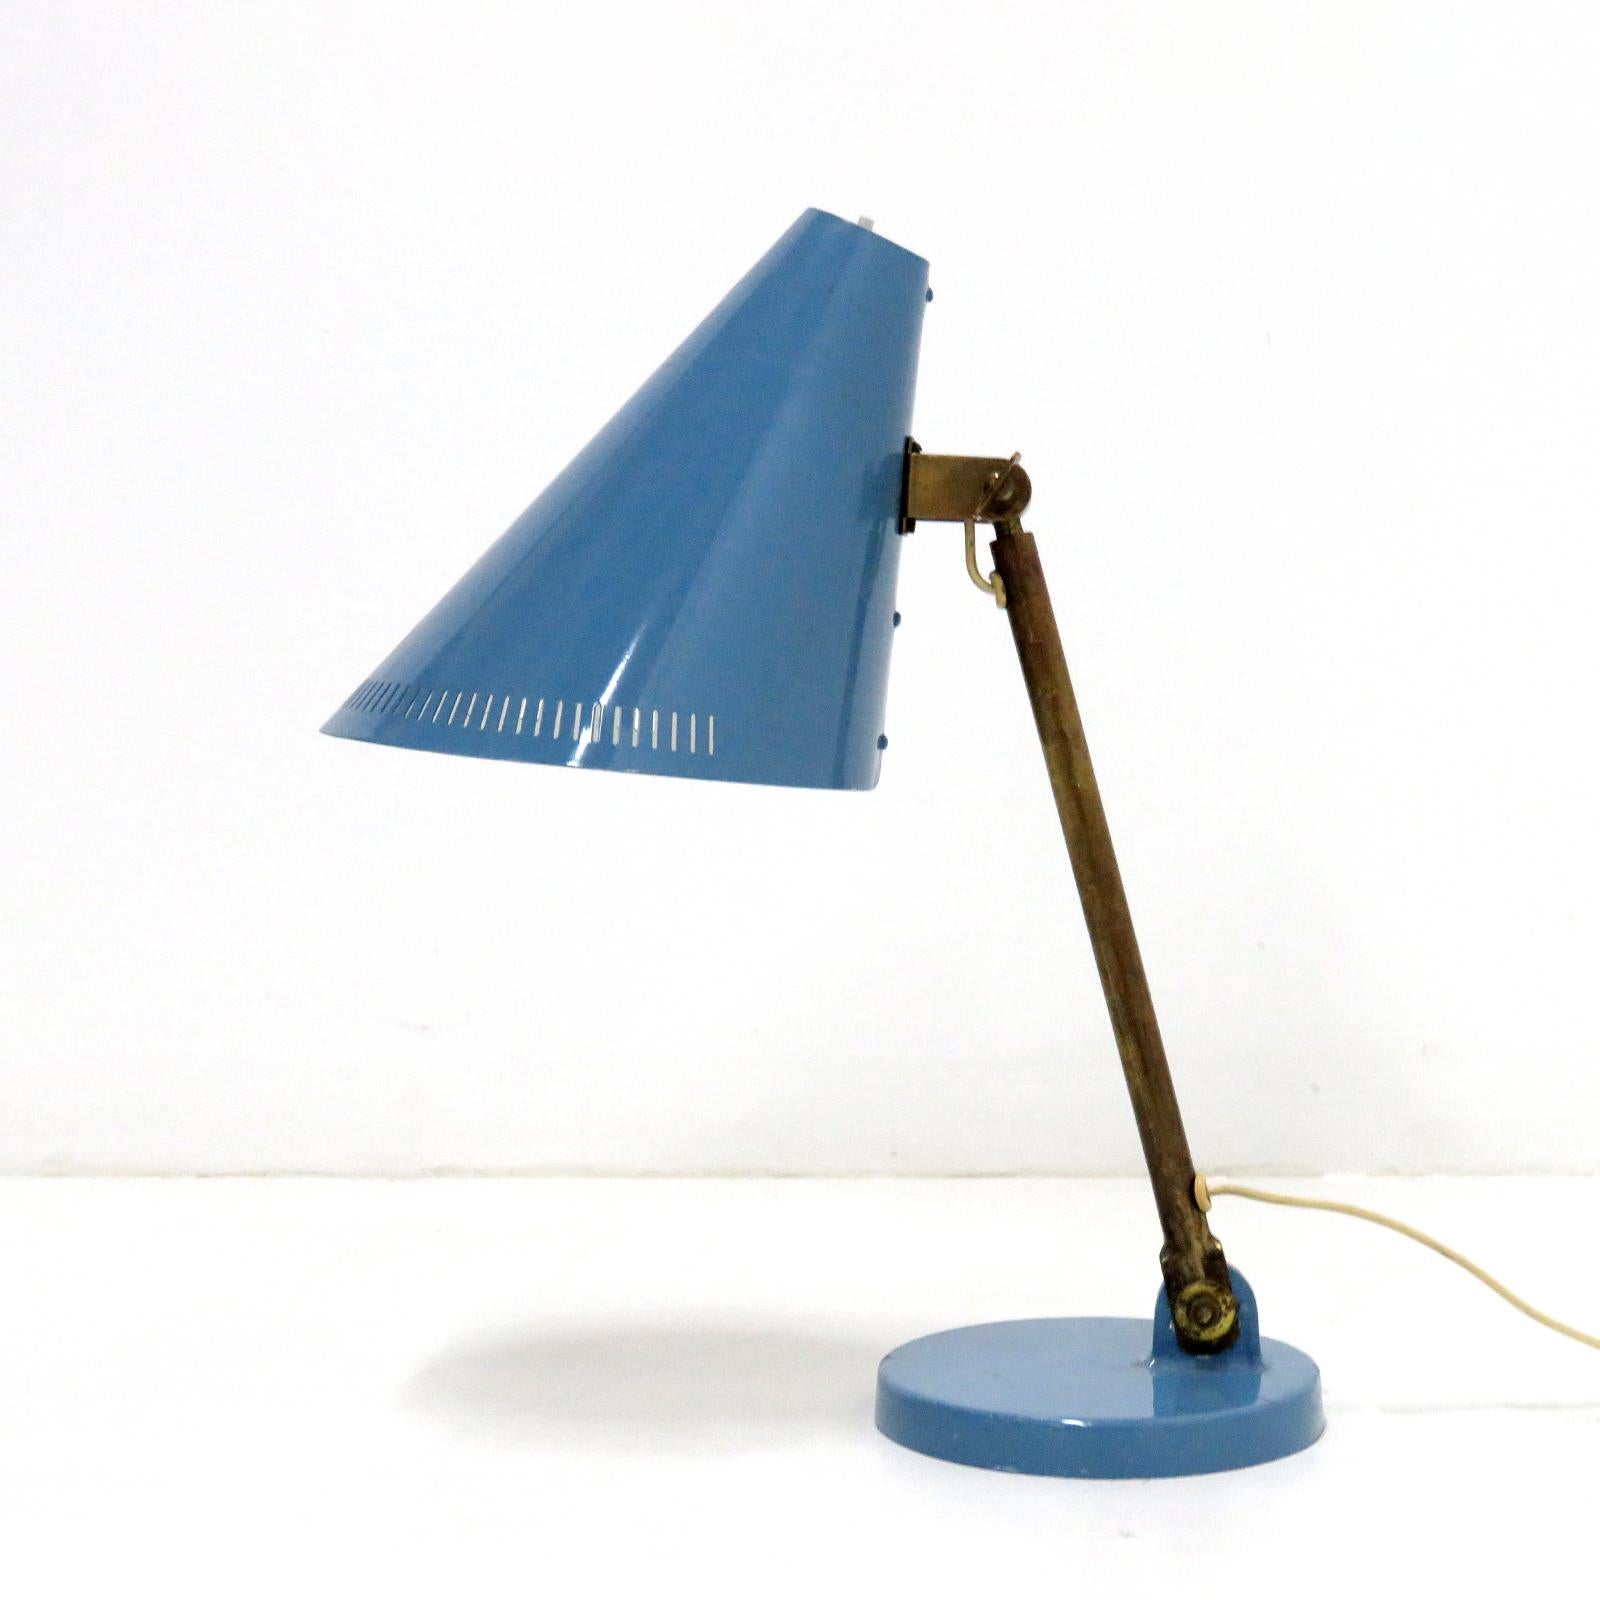 Wonderful early desk lamp model 5305 by Paavo Tynell for Taito, Finland, in brass with a large articulate light blue colored enameled shade and base, the shade is partially perforated and the brass arm is adjustable, stamped OY Taito 9222 at the